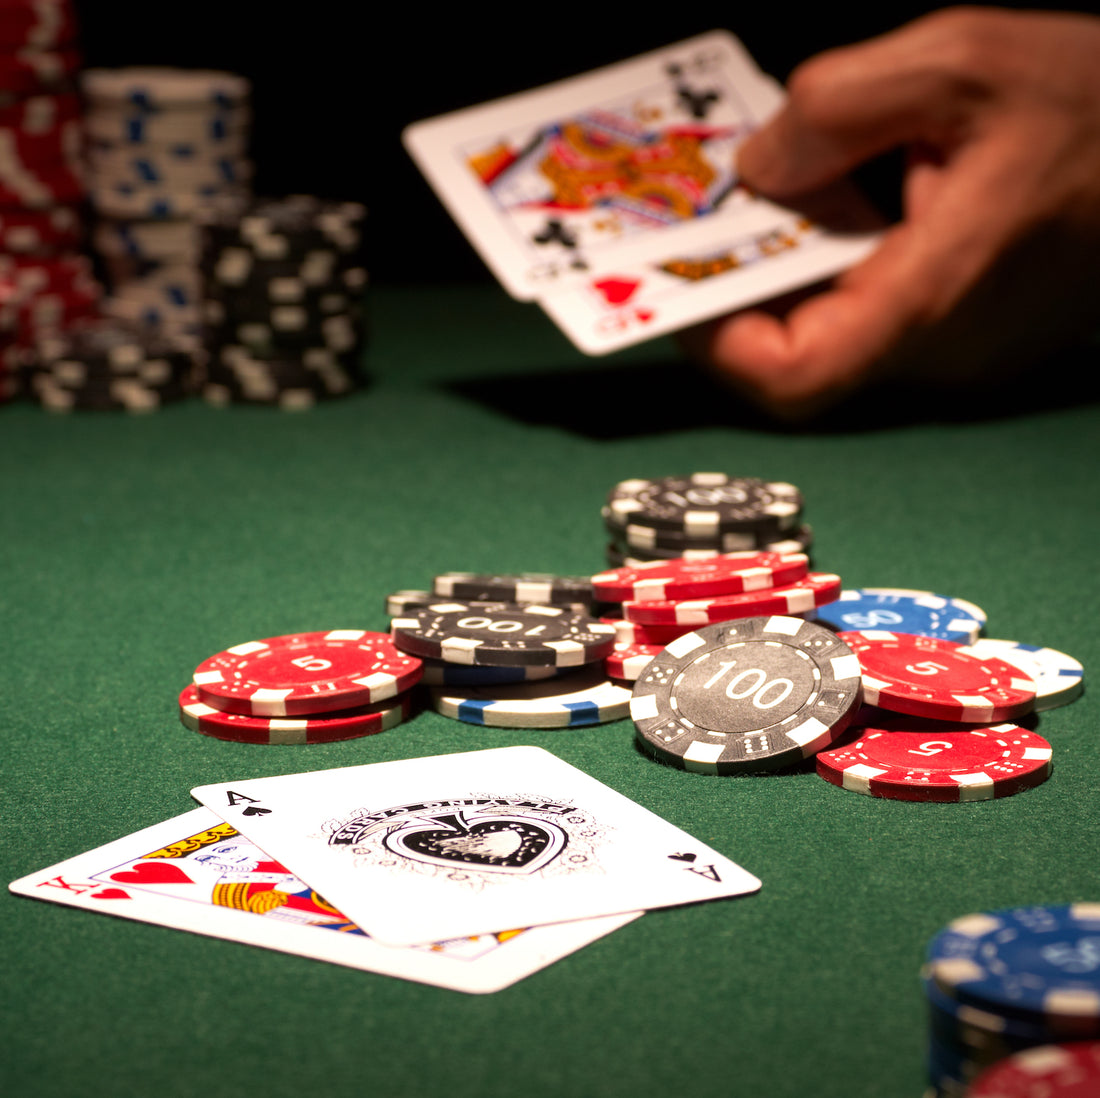 Best Round Poker Tables of 2022: Buyer’s Guide